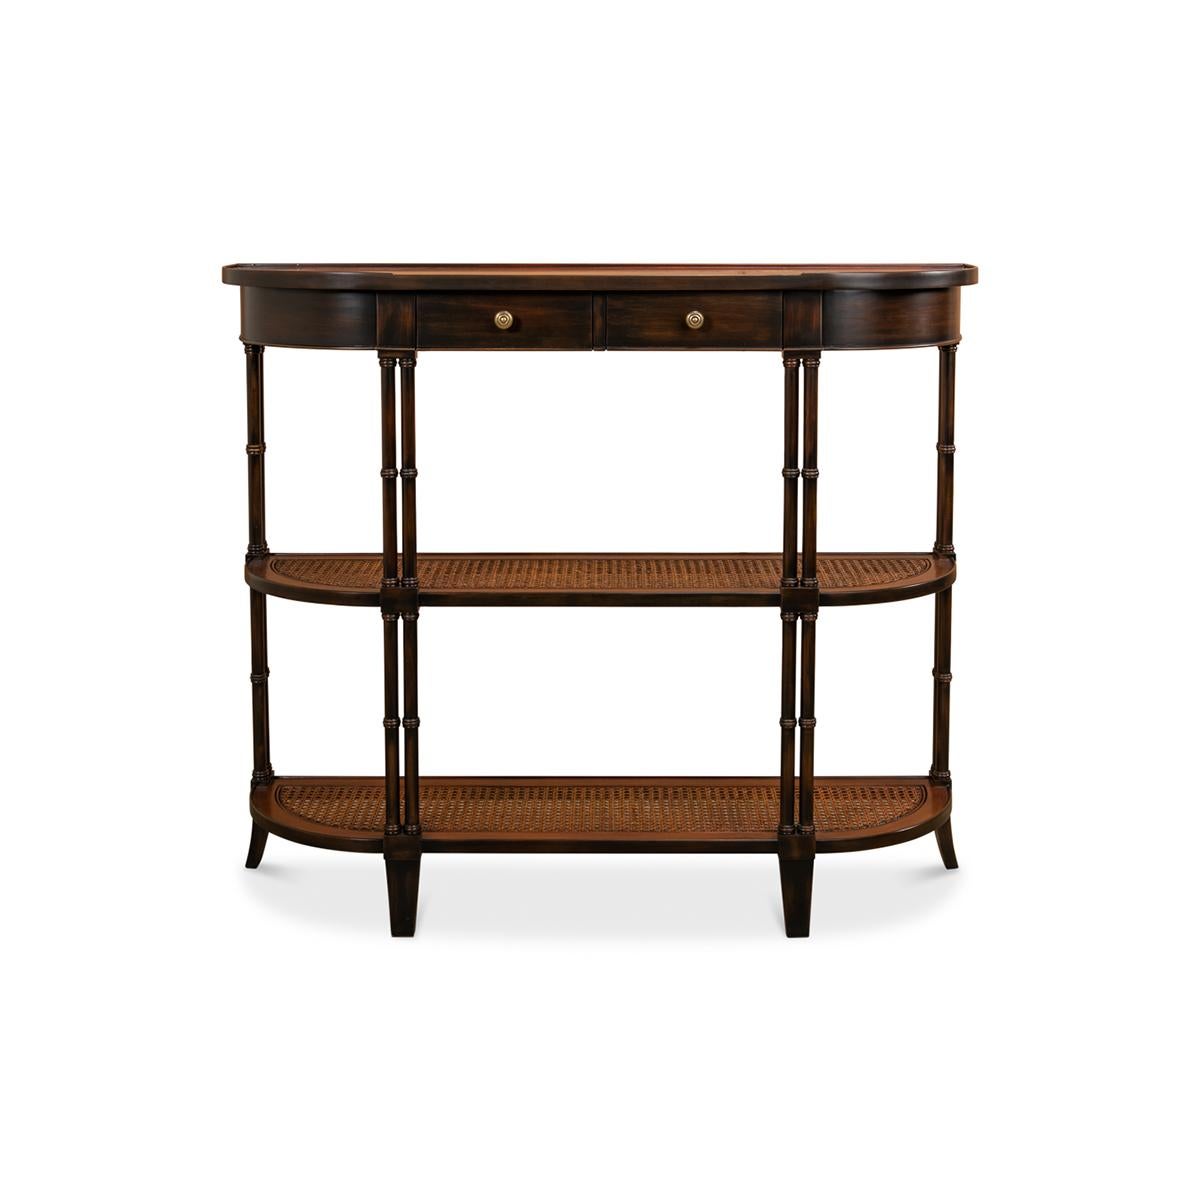 Regency Style Demilune Console, solid walnut with faux bamboo double leg supports, with a wooden gallery, above two drawers, and two lower shelf tiers with inlaid rattan.

Dimensions: 48